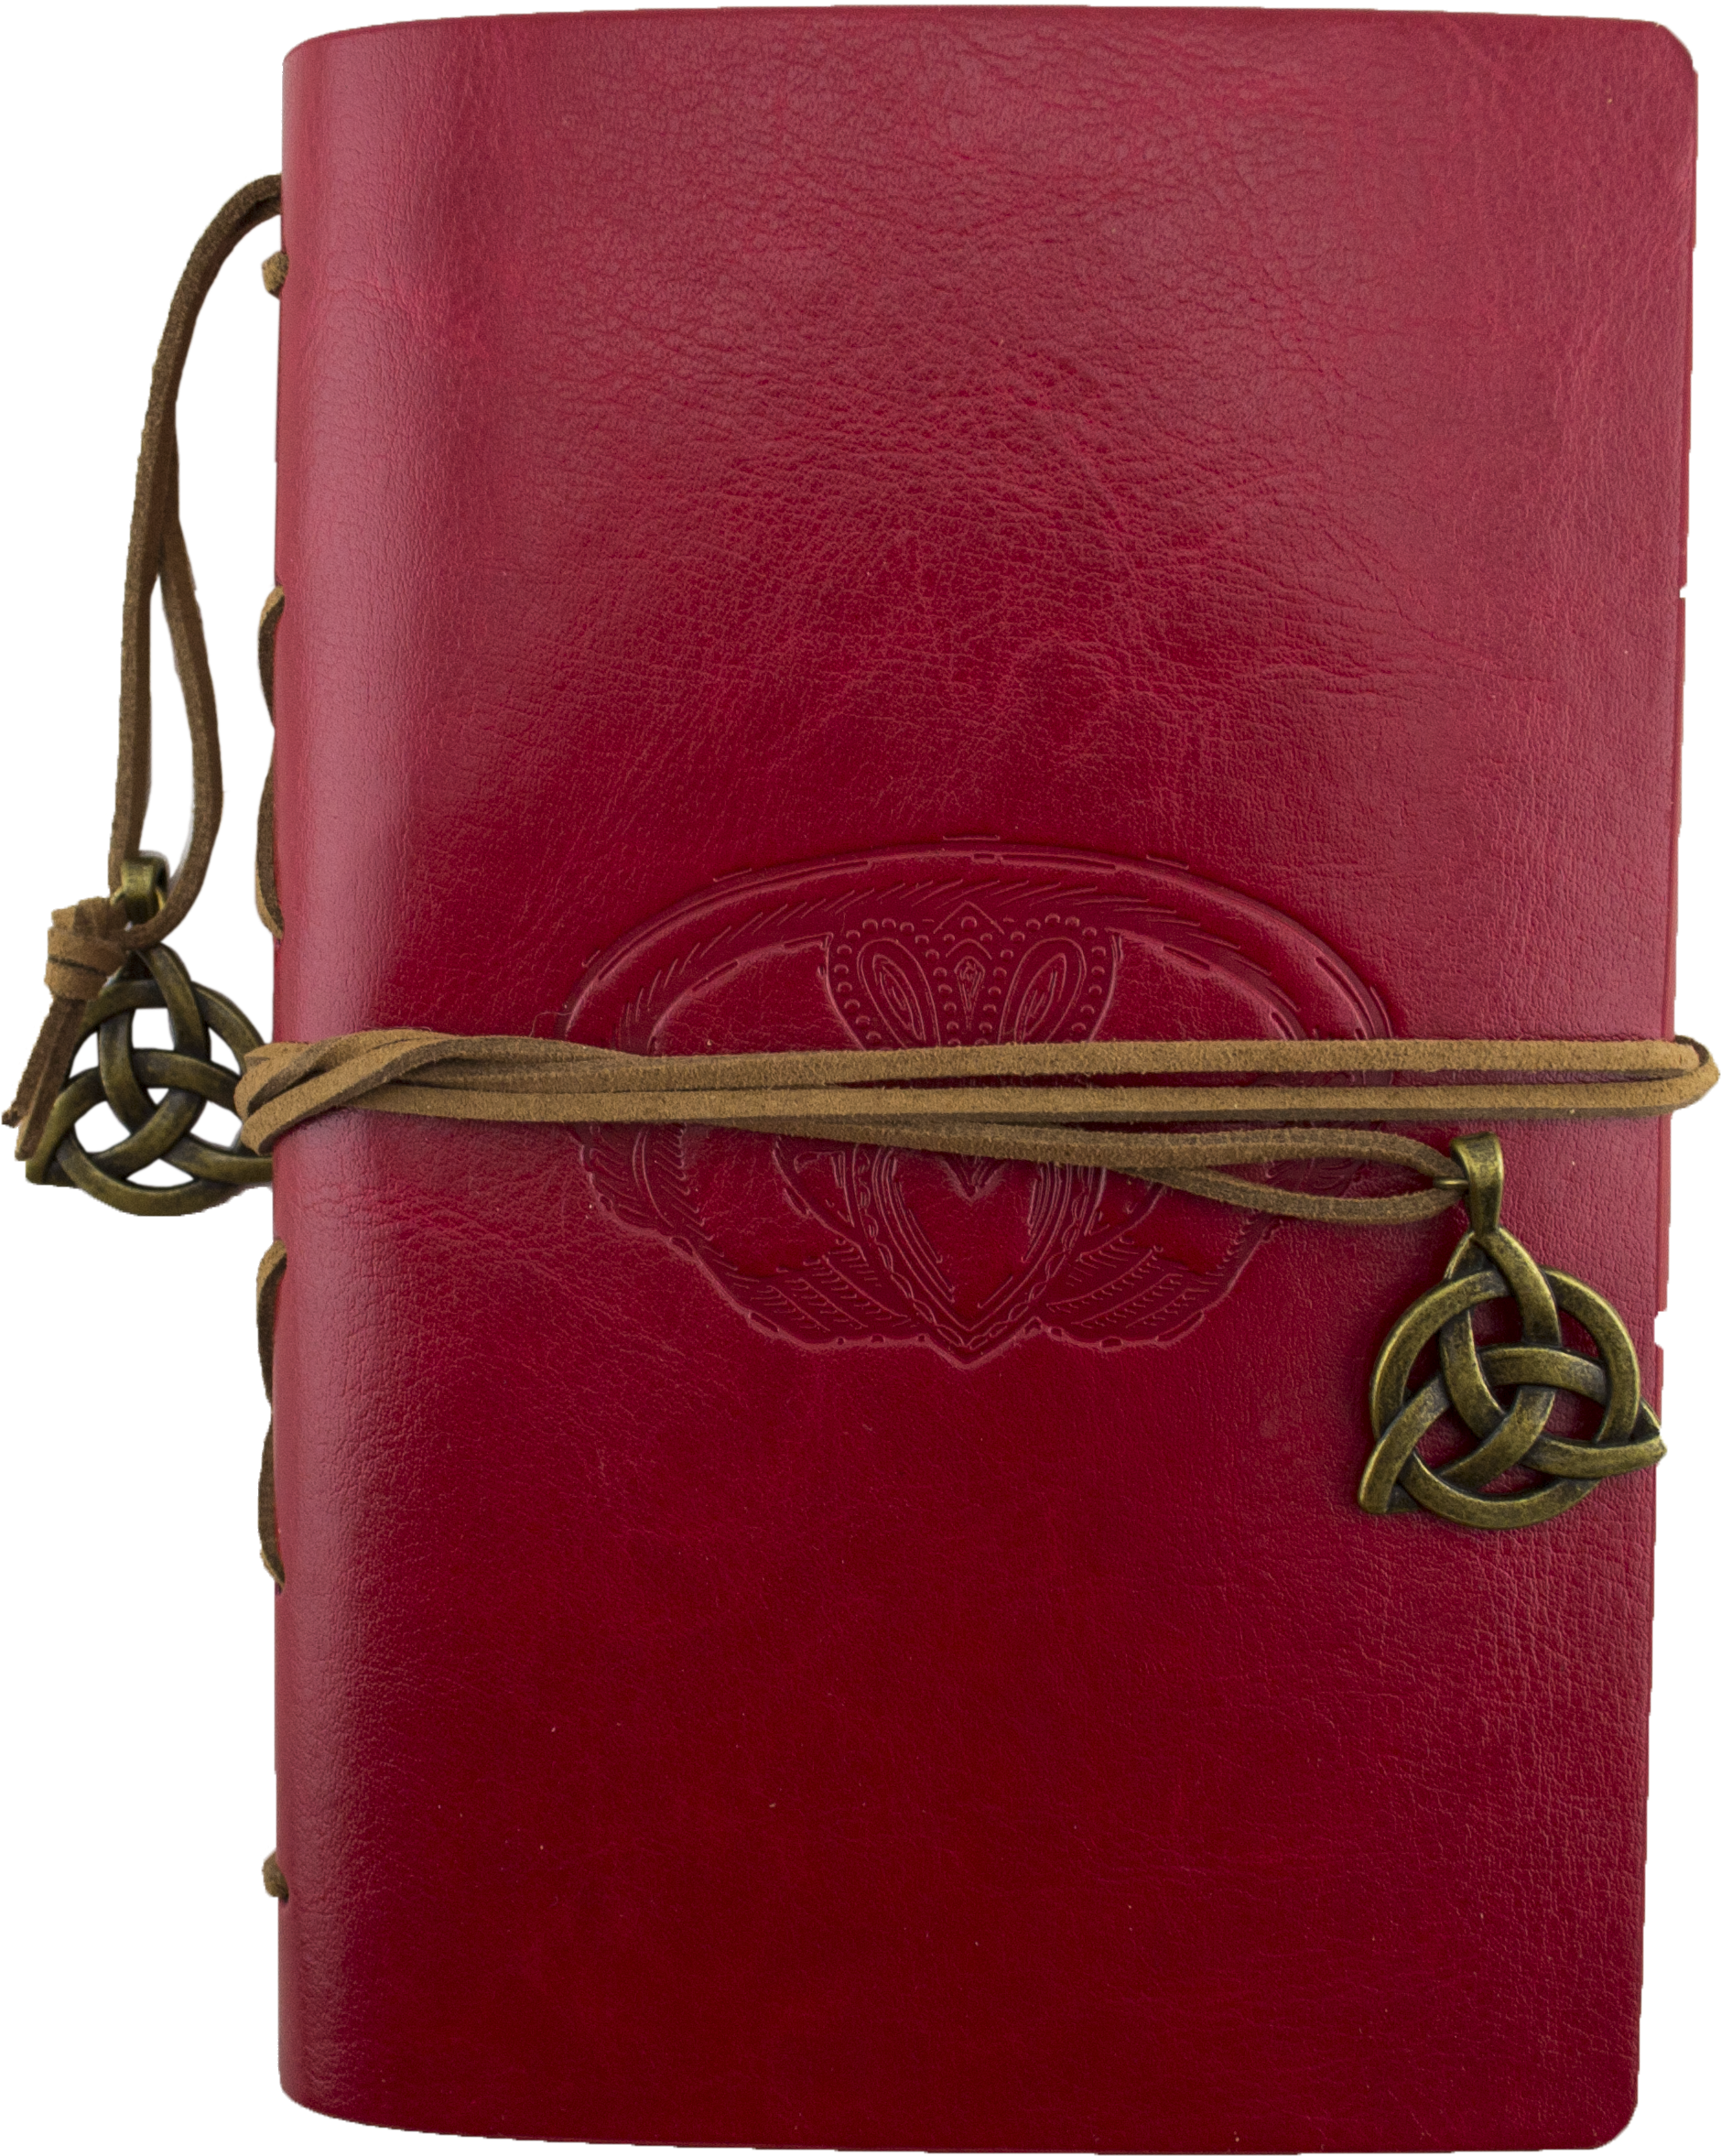 A Red Leather Book With A Knot